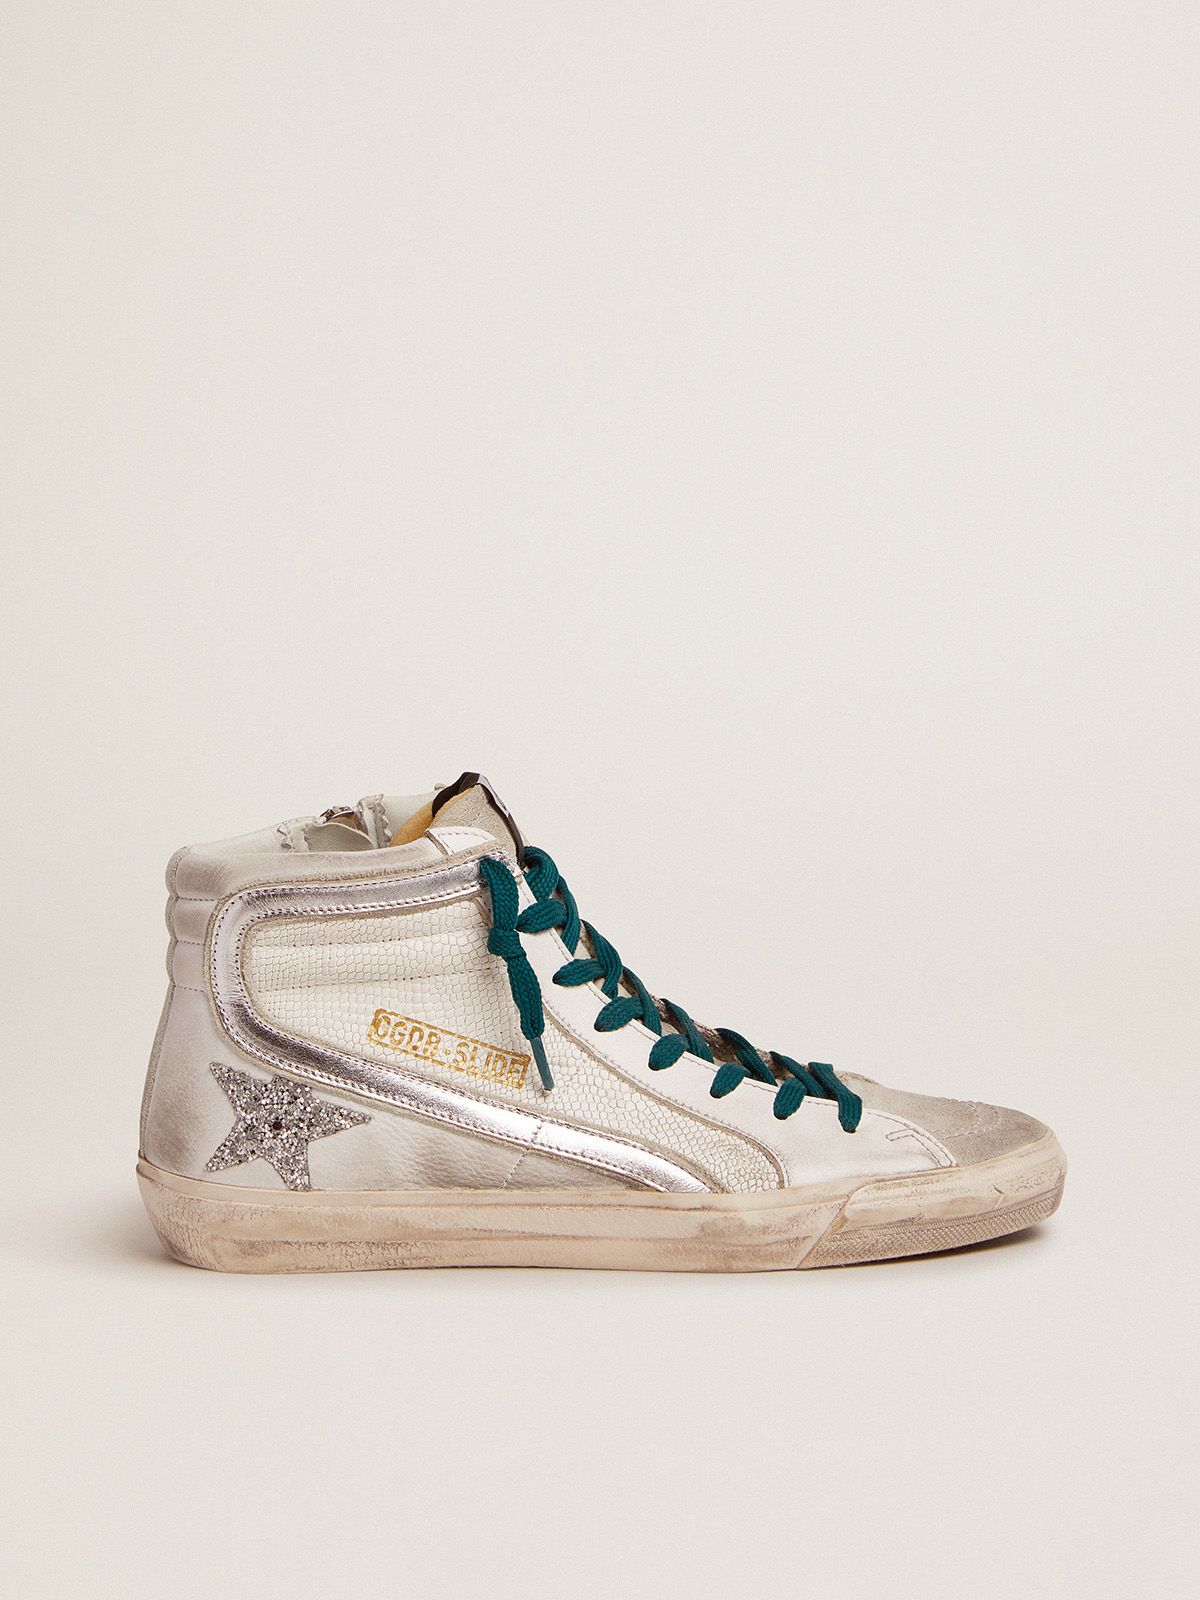 Golden Goose Bambina Slide sneakers with snake-print leather upper and silver glitter star